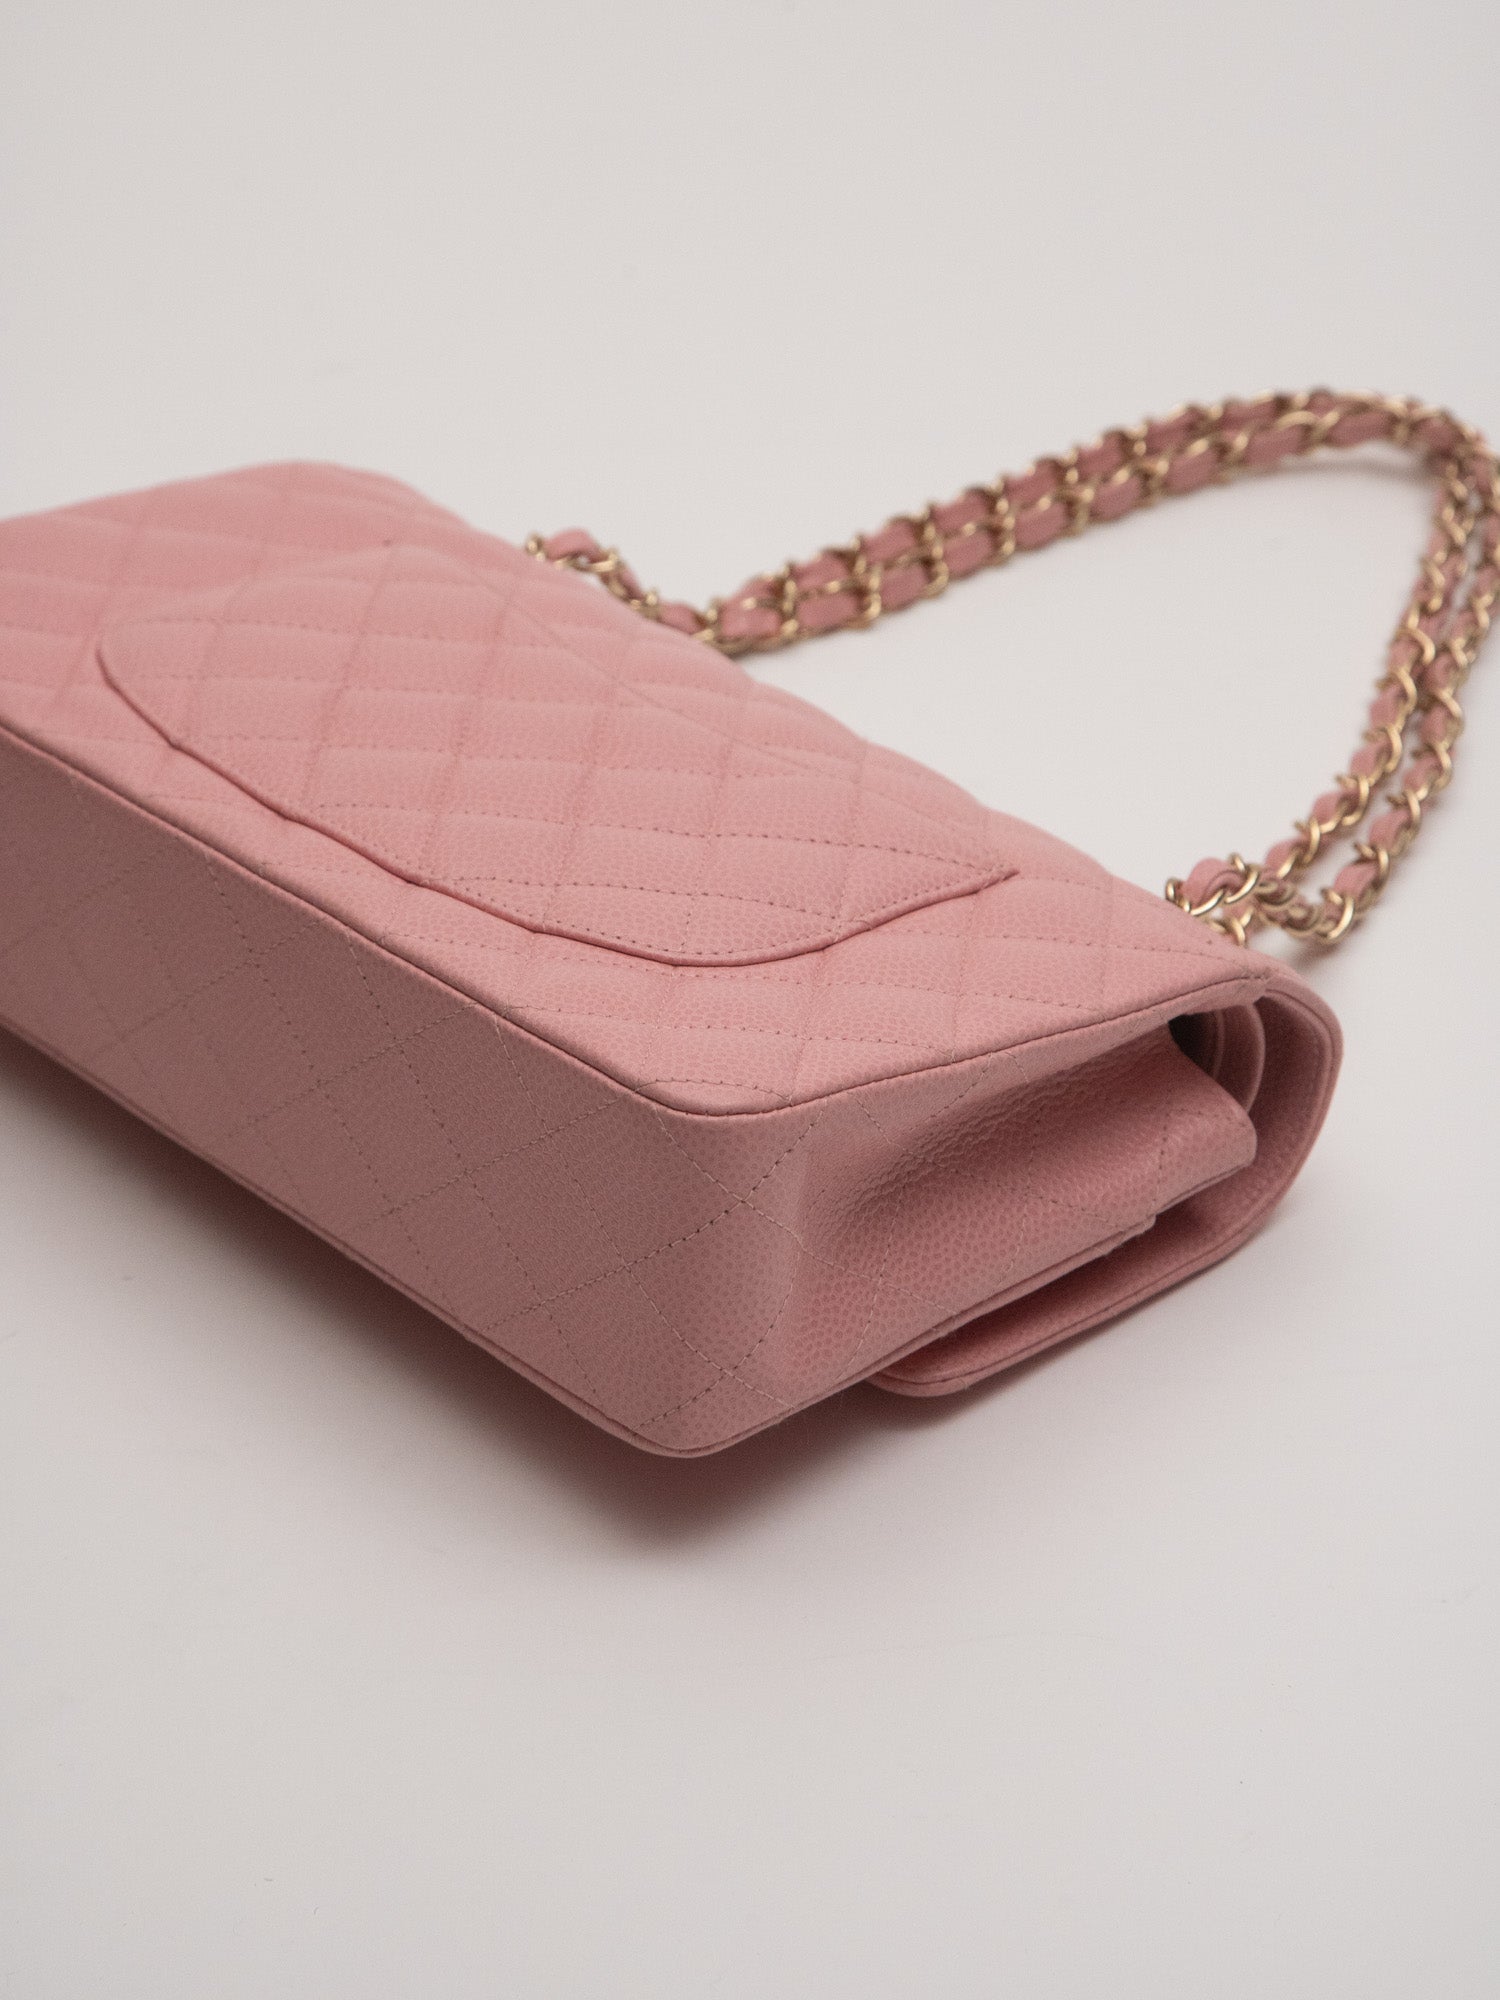 CHANEL Classic Flap Pink Bags & Handbags for Women